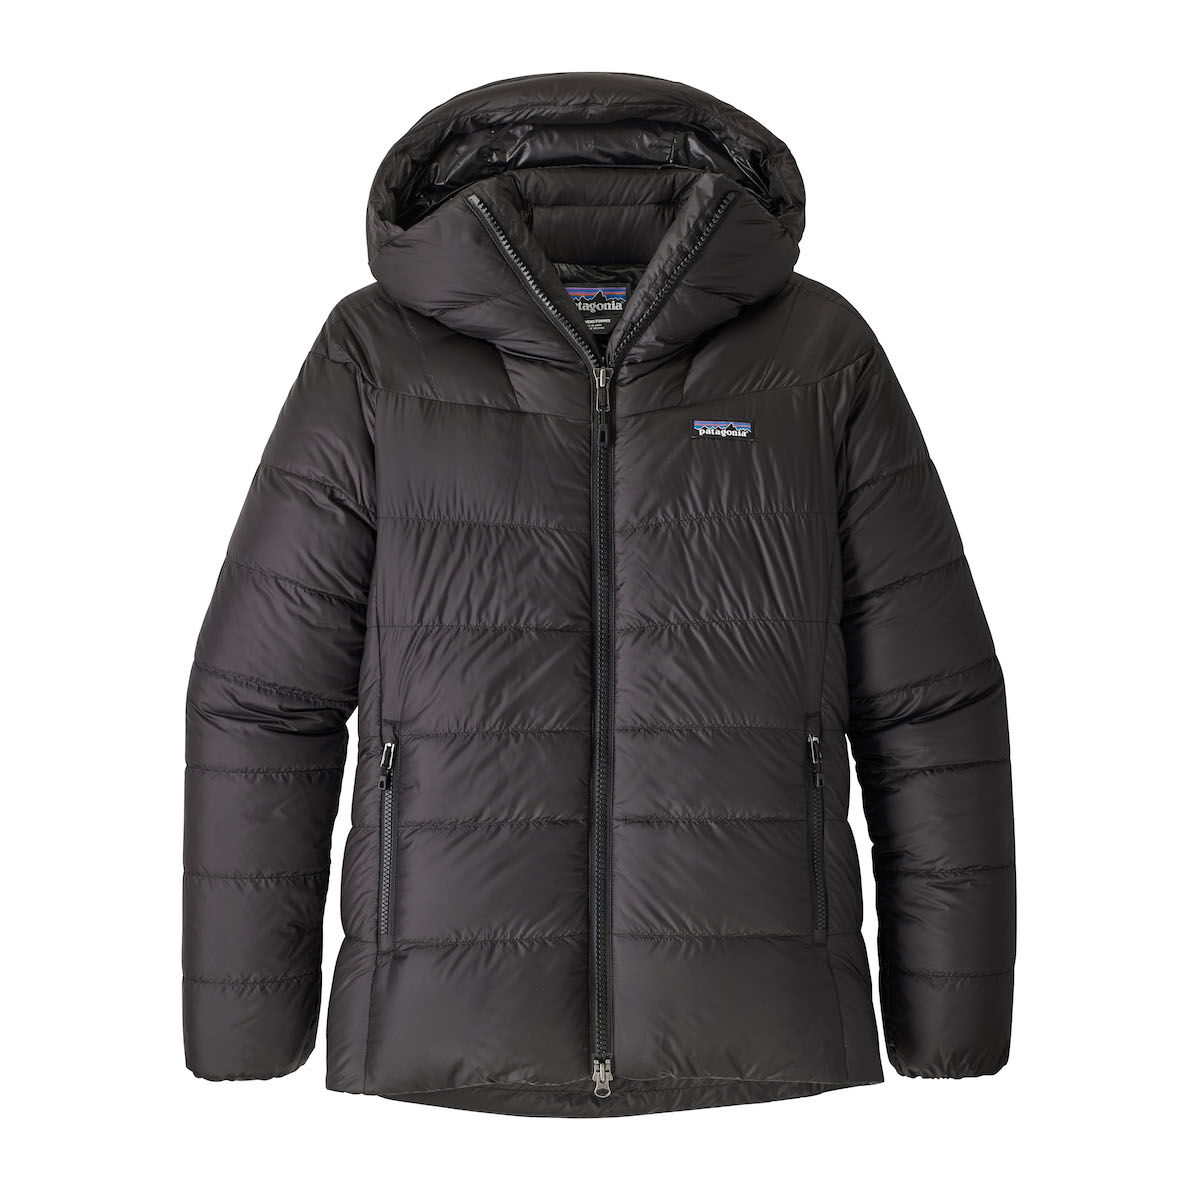 Patagonia - Fitz Roy Down Parka - Giacca in piumino - Donna